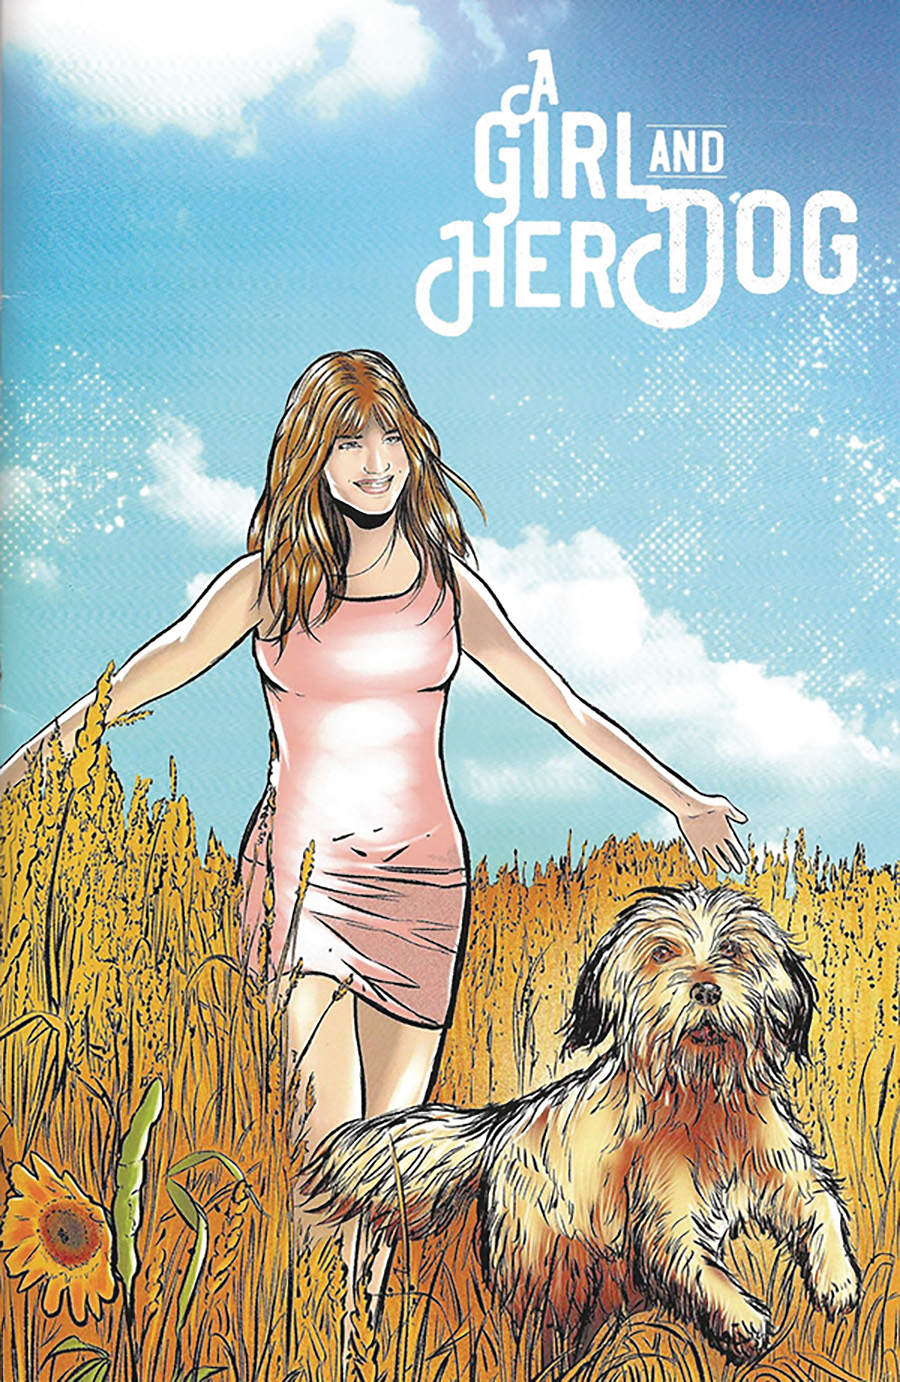 A Girl And Her Dog #1 (One Shot)